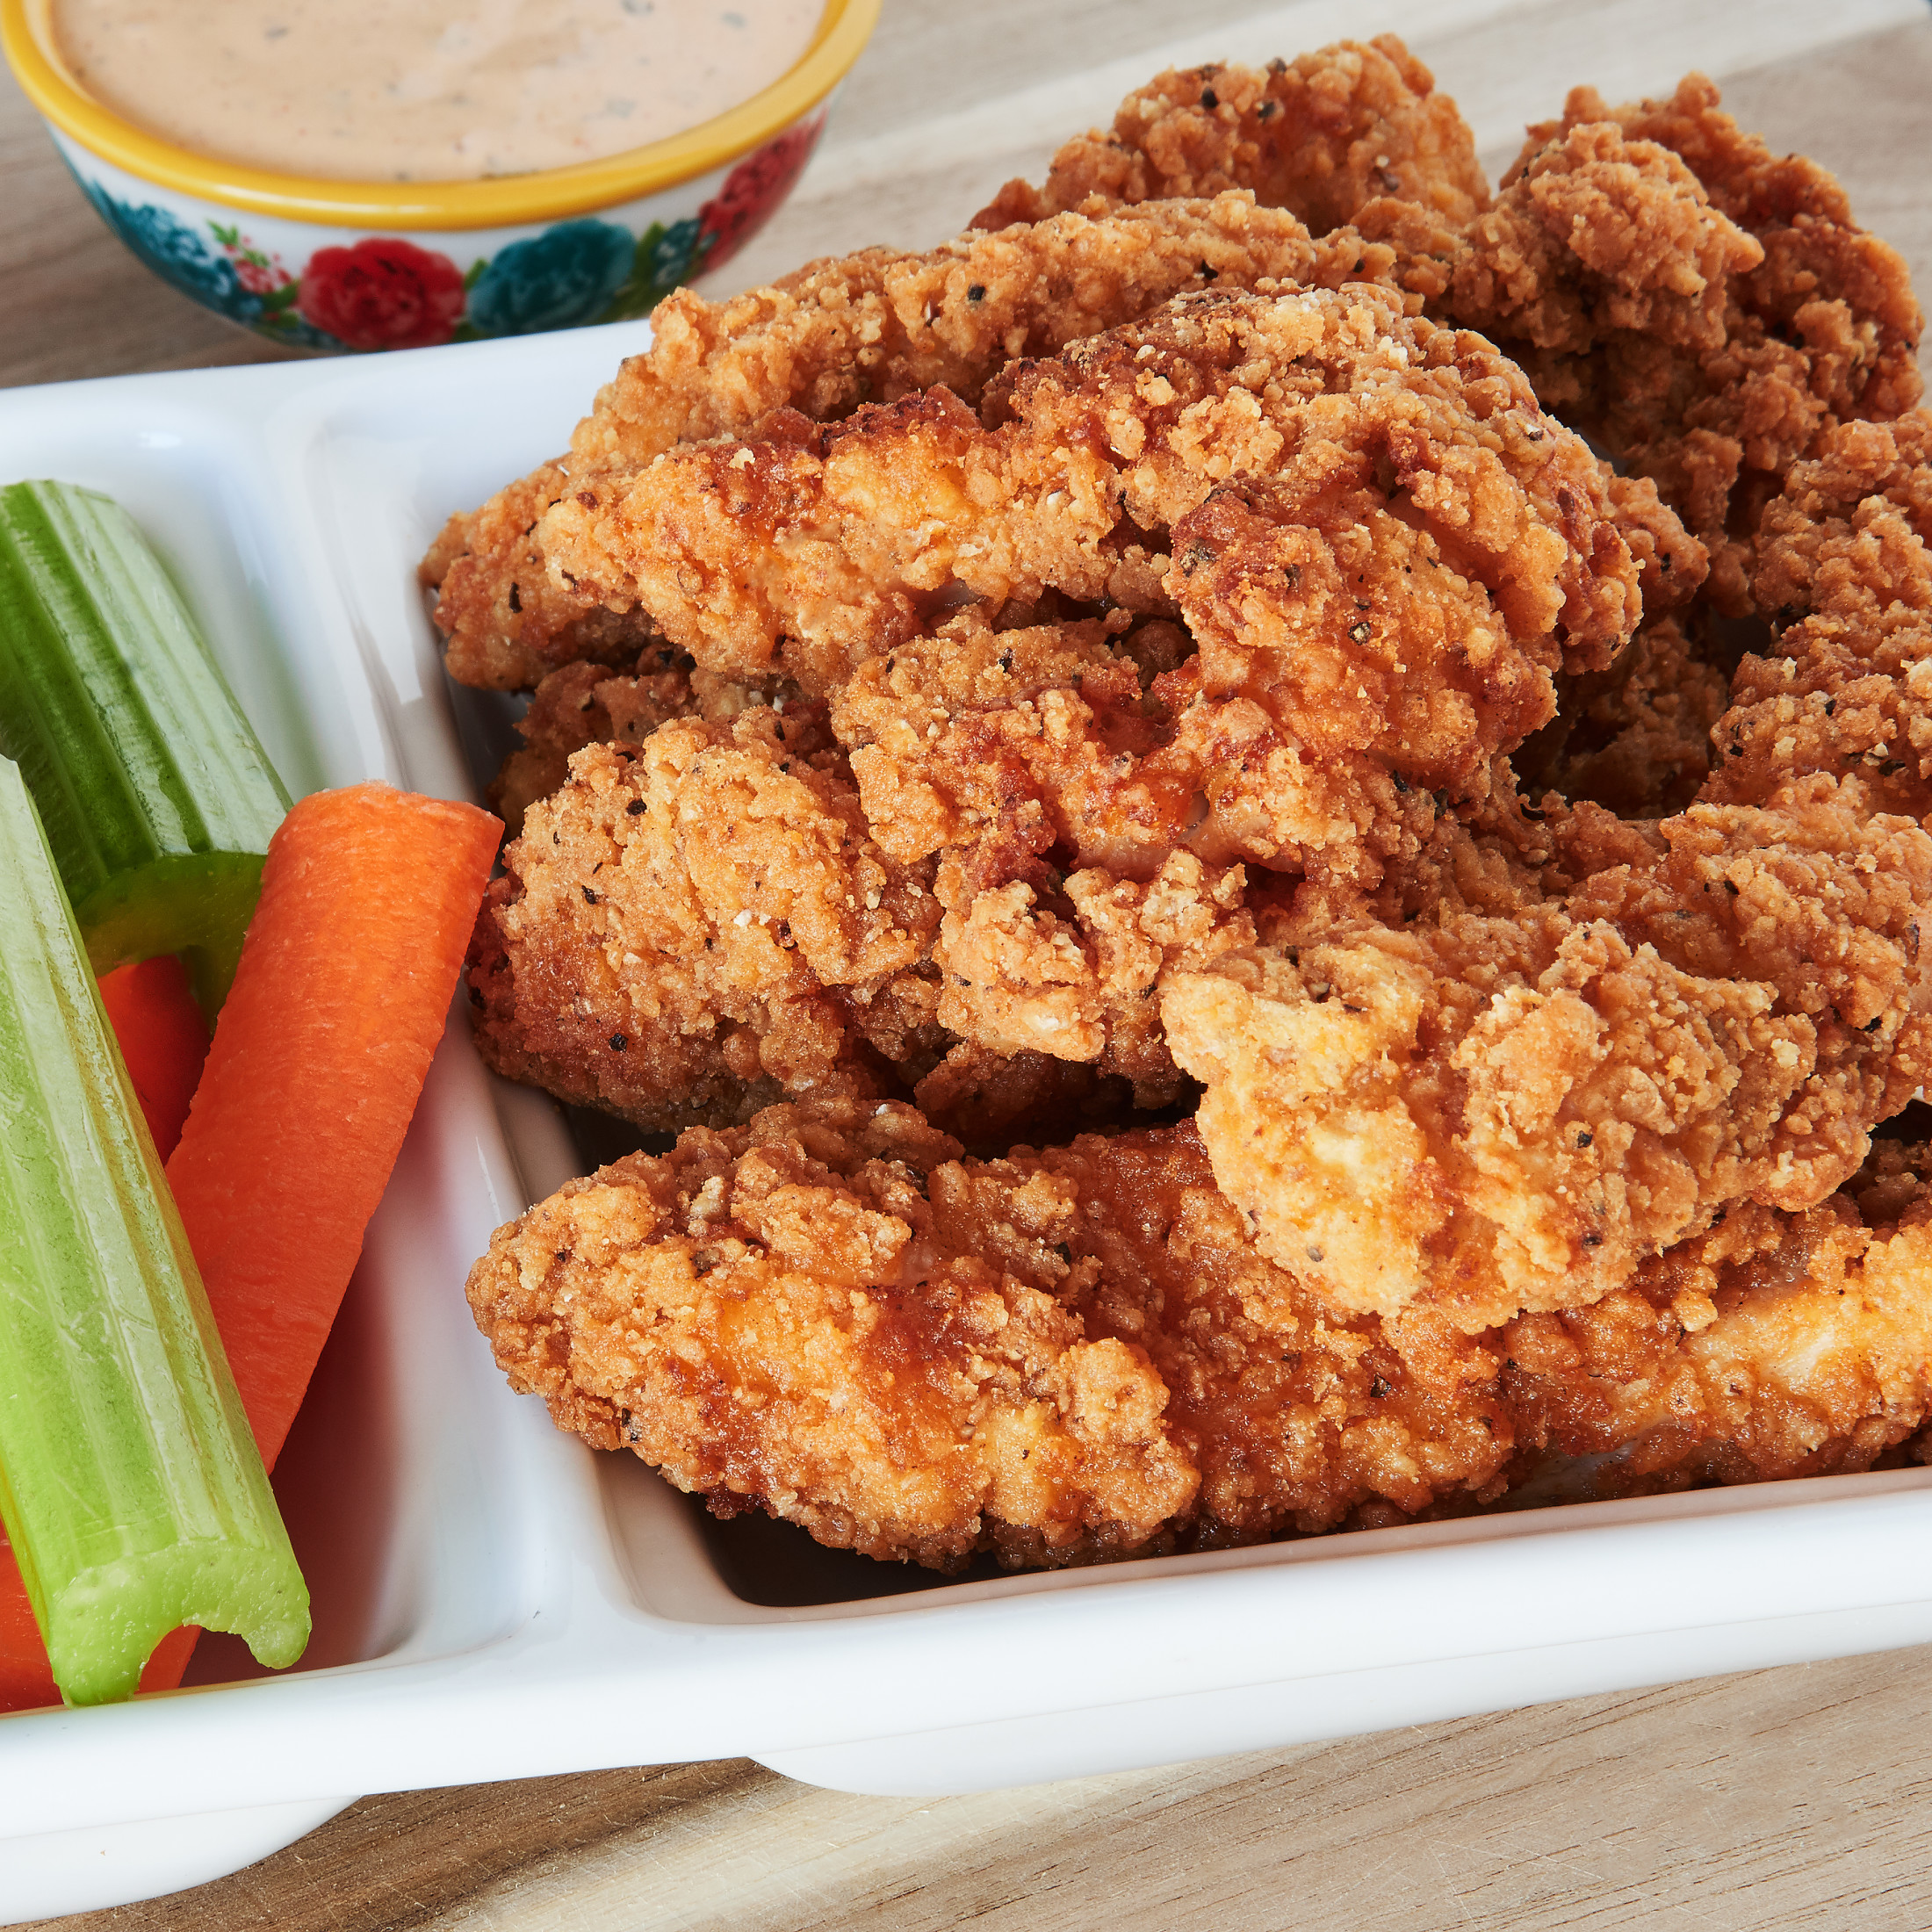 Great Value Fully Cooked Chicken Strips, 25 oz (Frozen) - image 4 of 11